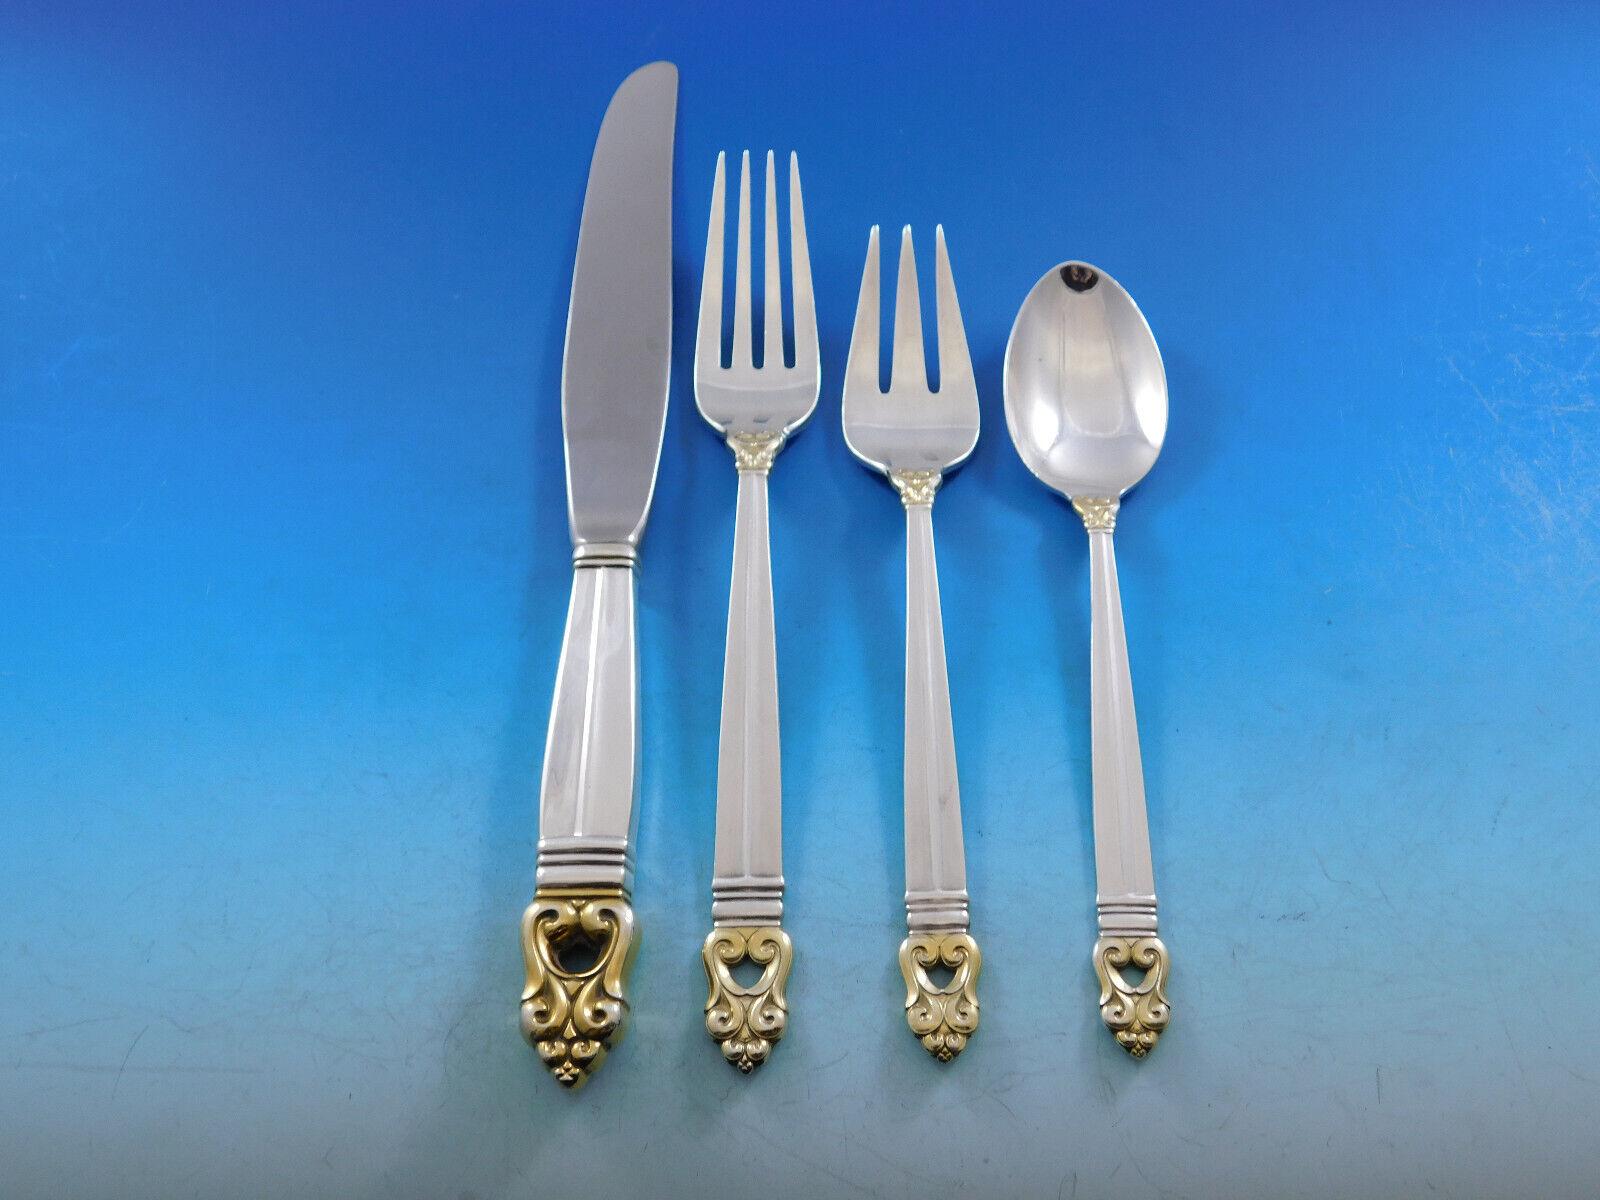 Royal Danish Gold Accent by International Sterling Silver flatware set - 61 pieces. This set has a gold accents on the tip and the base of the scrolling handle design and includes:

12 Knives, 9